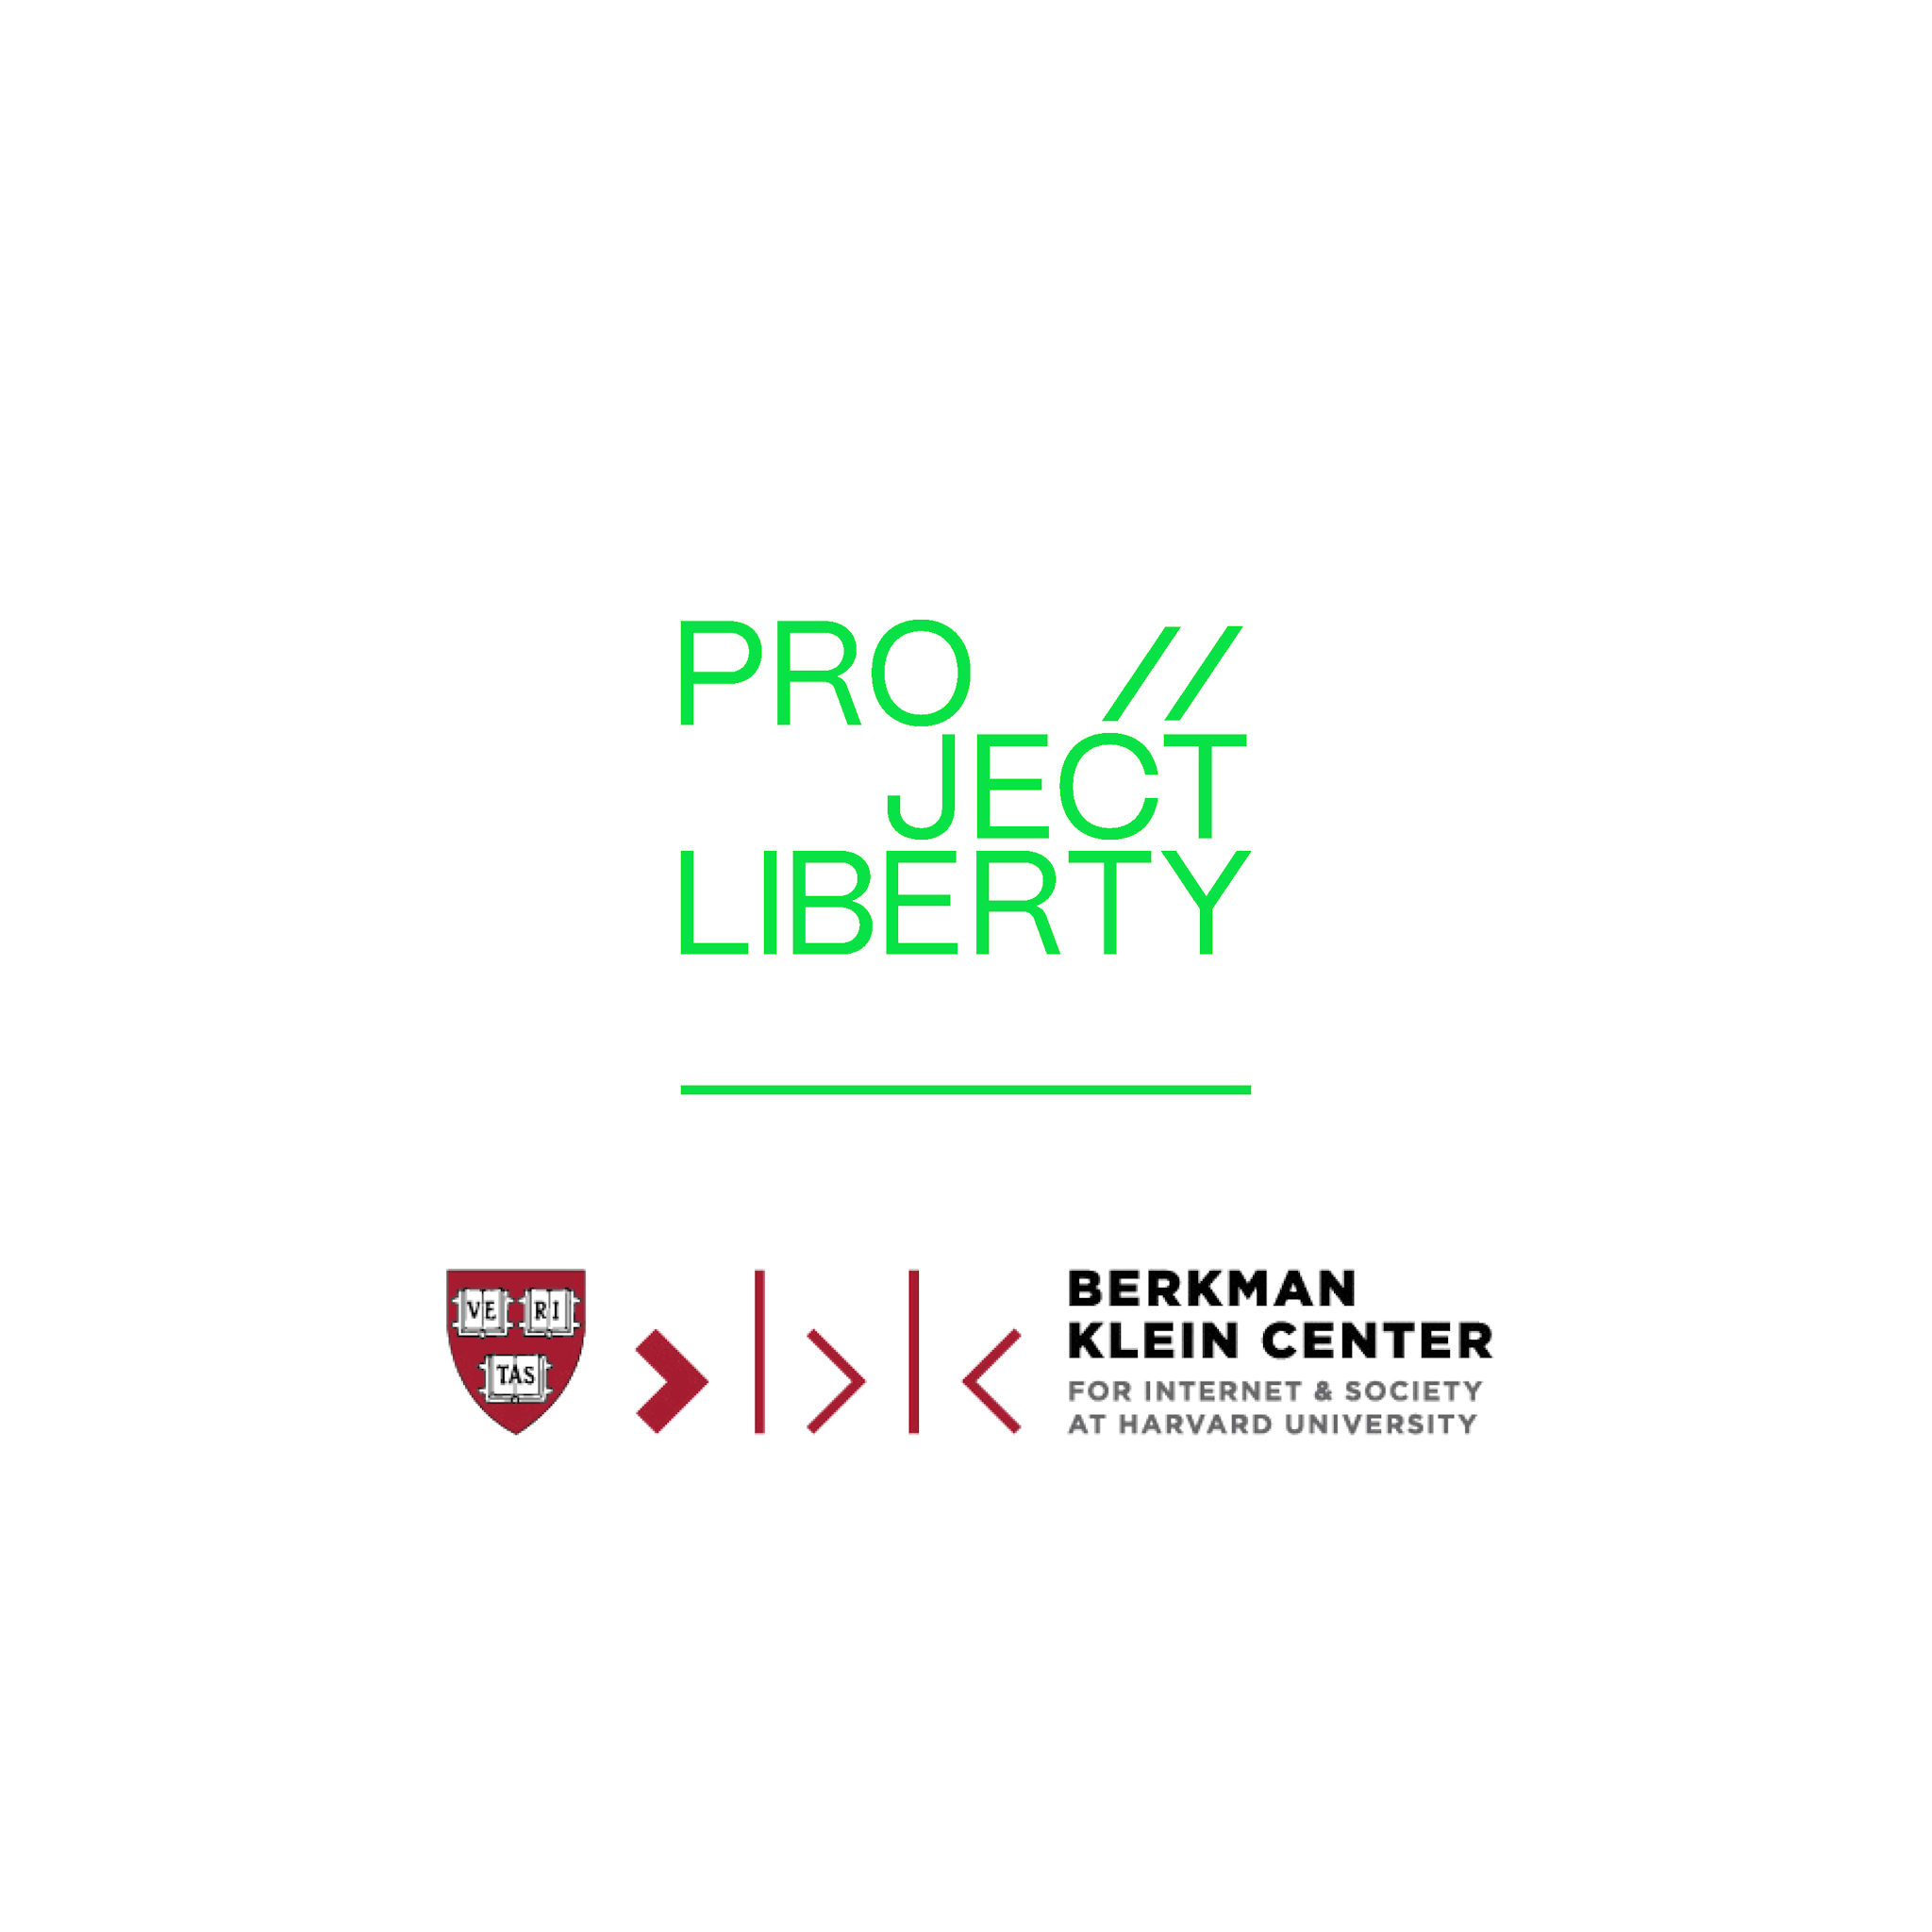 Project Liberty and Berkman Klein Center for Internet and Society at Harvard University